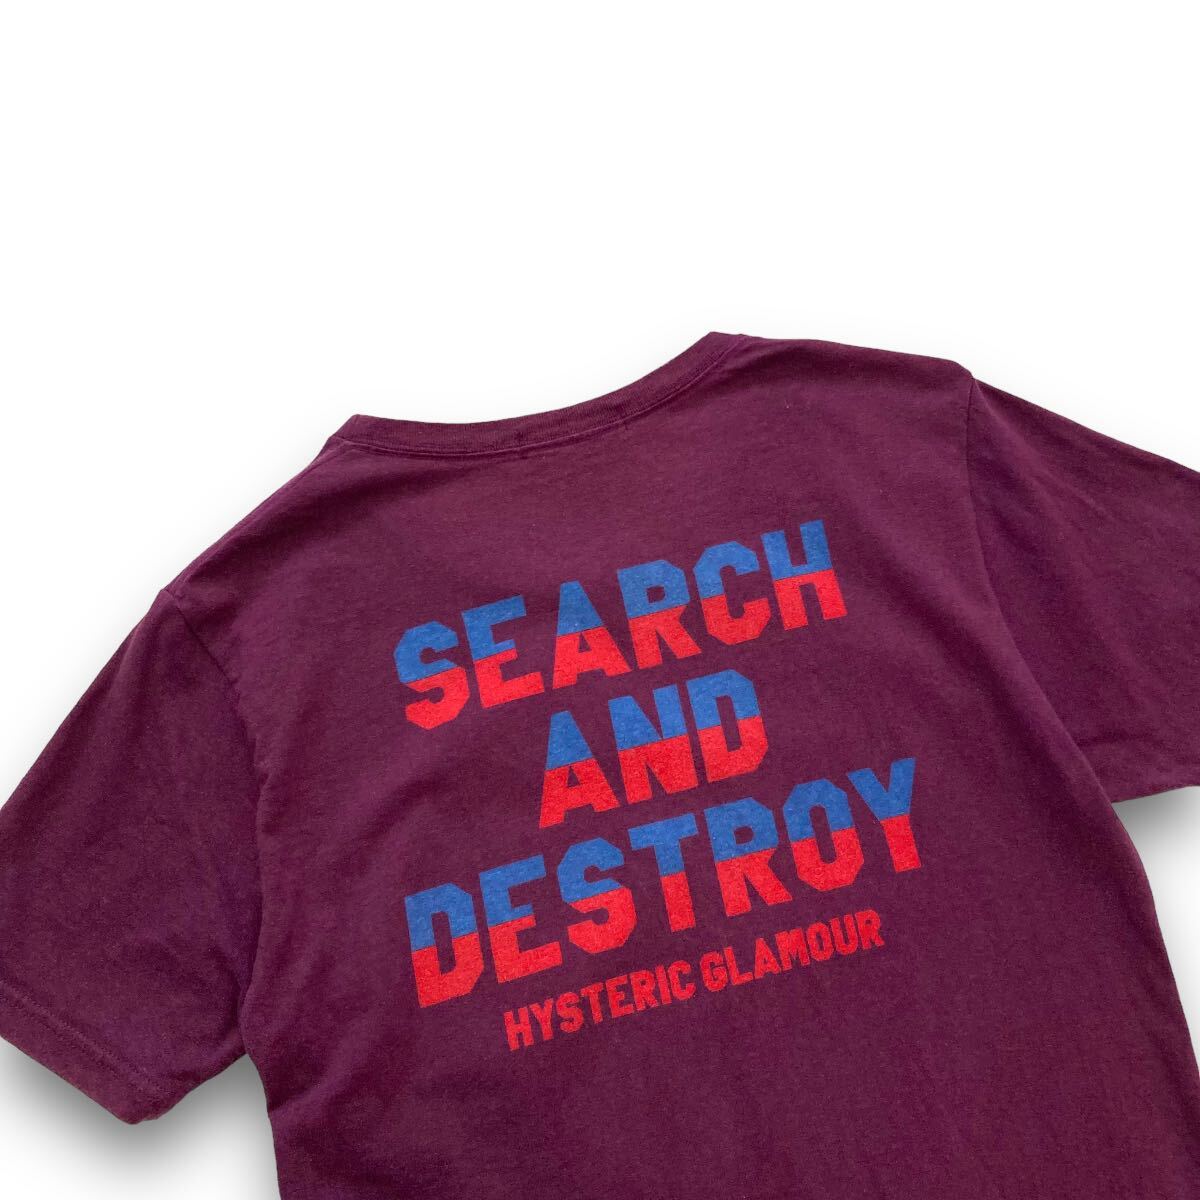 【HYSTERIC GLAMOUR】ヒステリックグラマー プリントTシャツ MICHIGAN SEARCH AND DESTROY ヒスガール アメリカ星条旗 半袖Tシャツ エンジの画像10